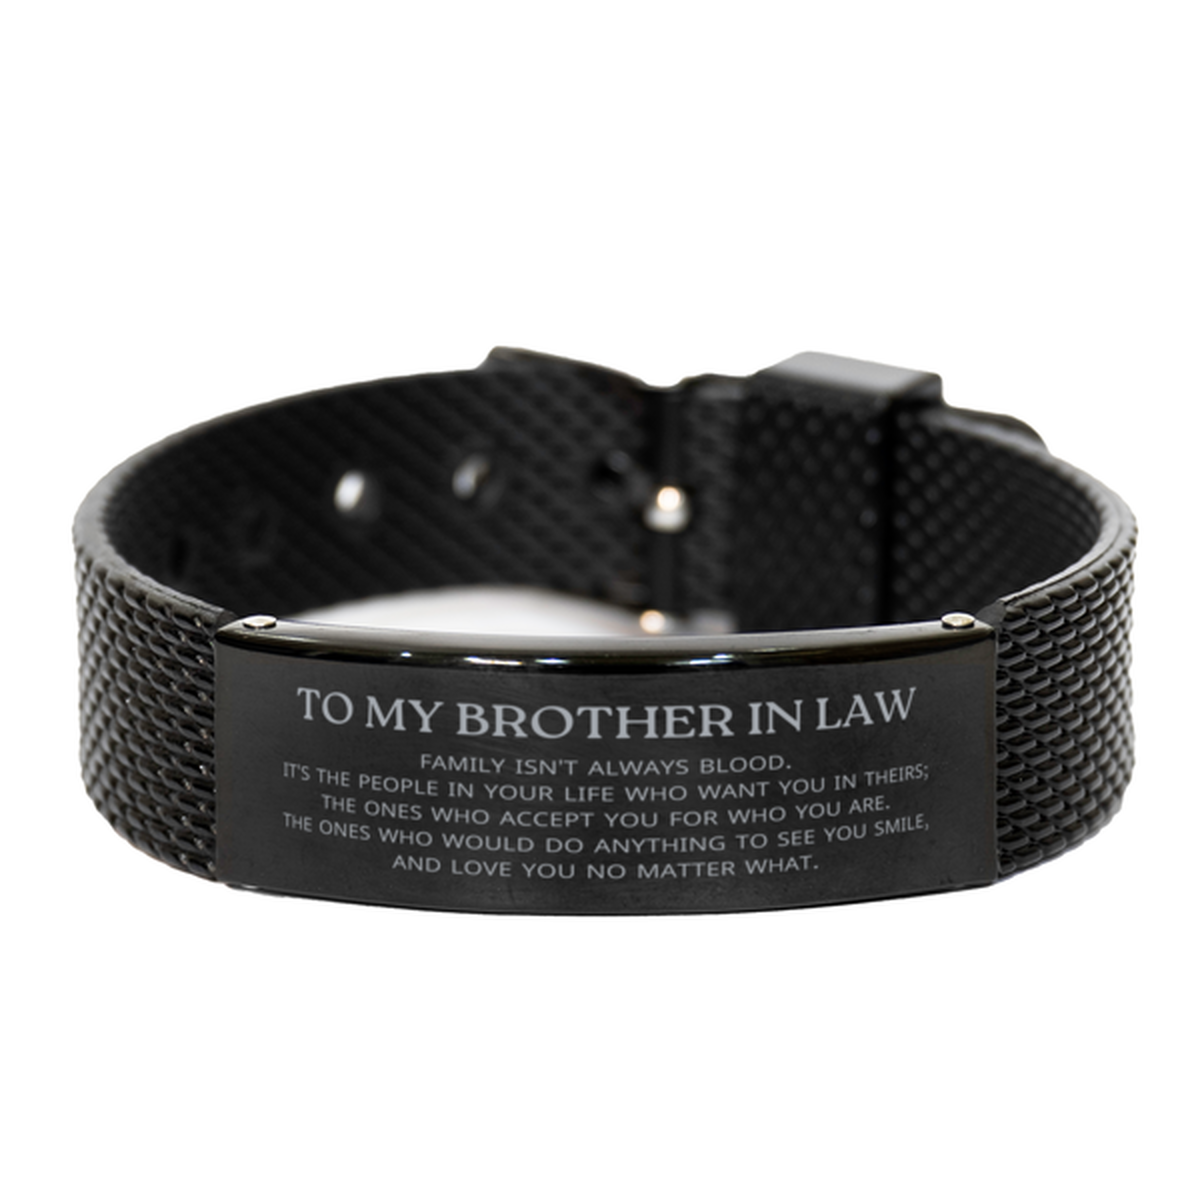 To My Brother In Law Gifts, Family isn't always blood, Brother In Law Black Shark Mesh Bracelet, Birthday Christmas Unique Present For Brother In Law